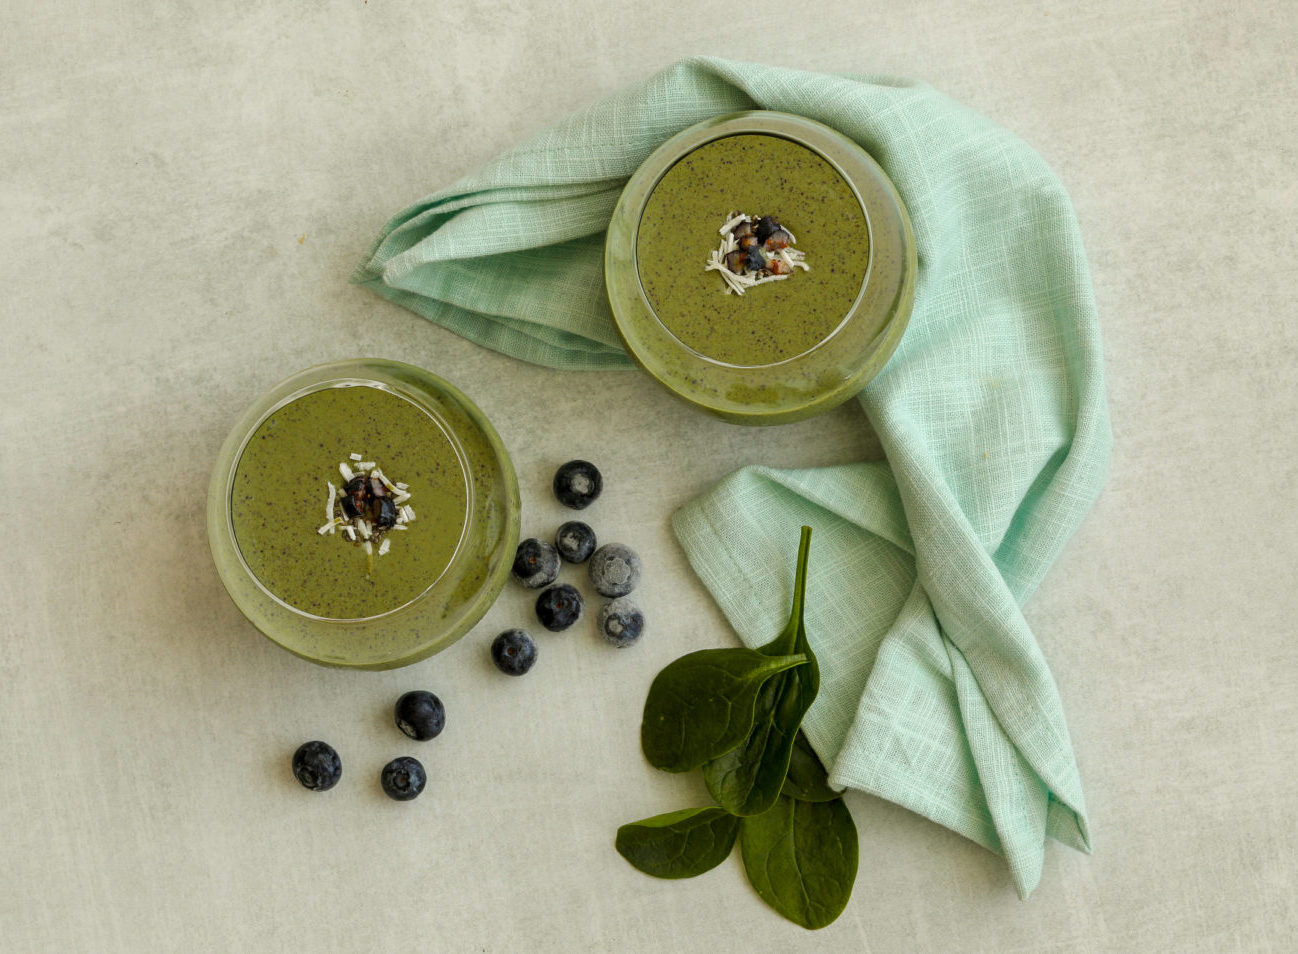 Sugar Free Blueberry Chia Protein Smoothie. Hemp Seed Benefits and How to Use Them